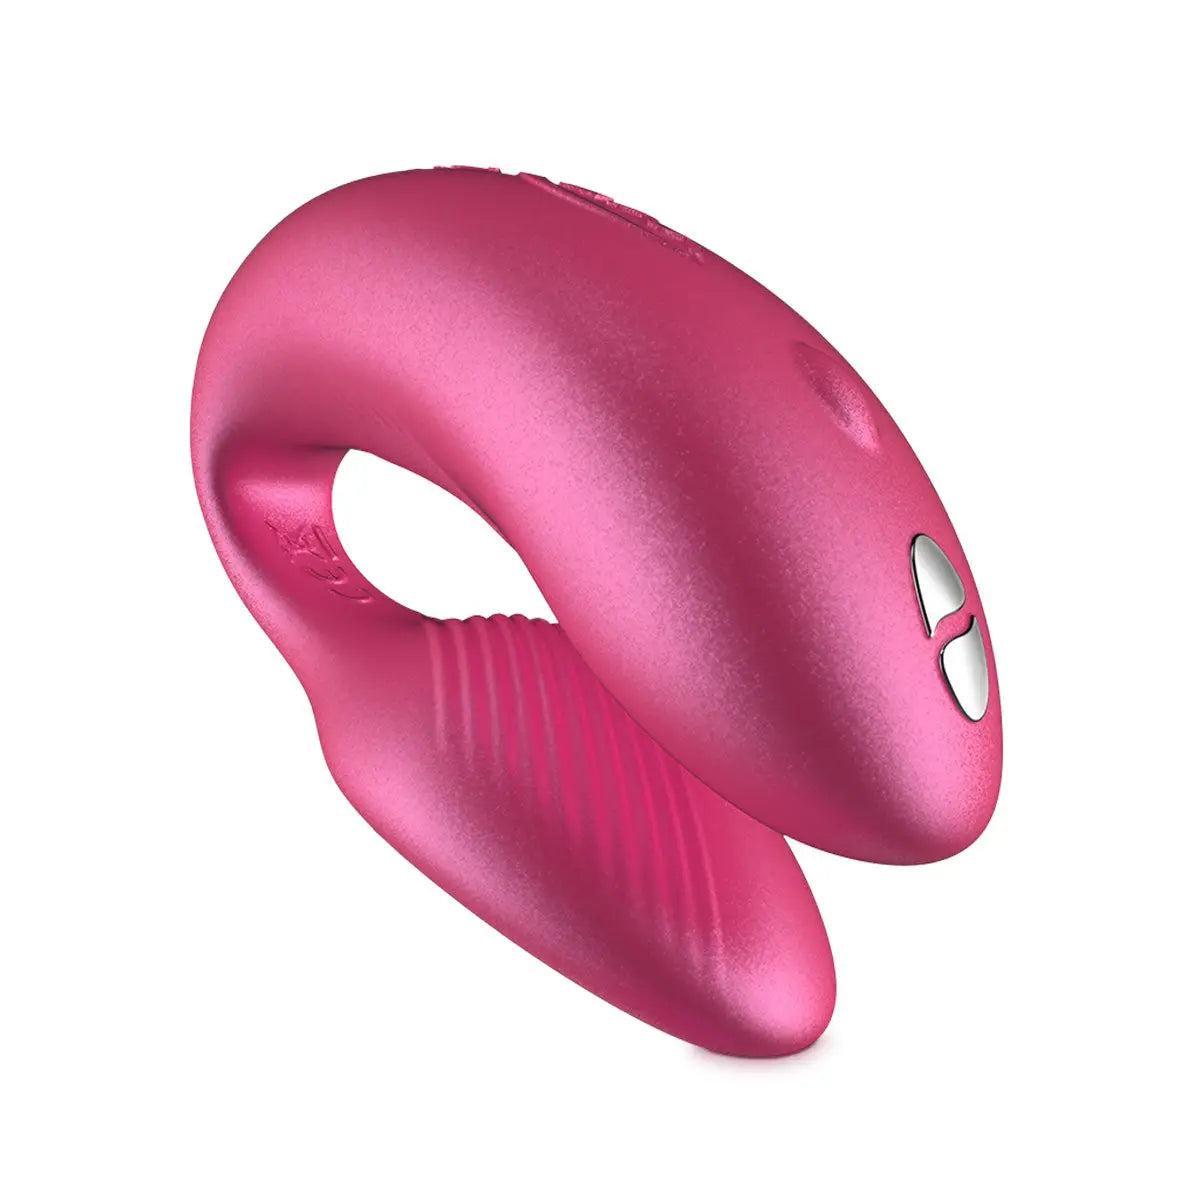 Exploring the Pleasure Revolution with We-Vibe: A Guide to Intimate Bliss